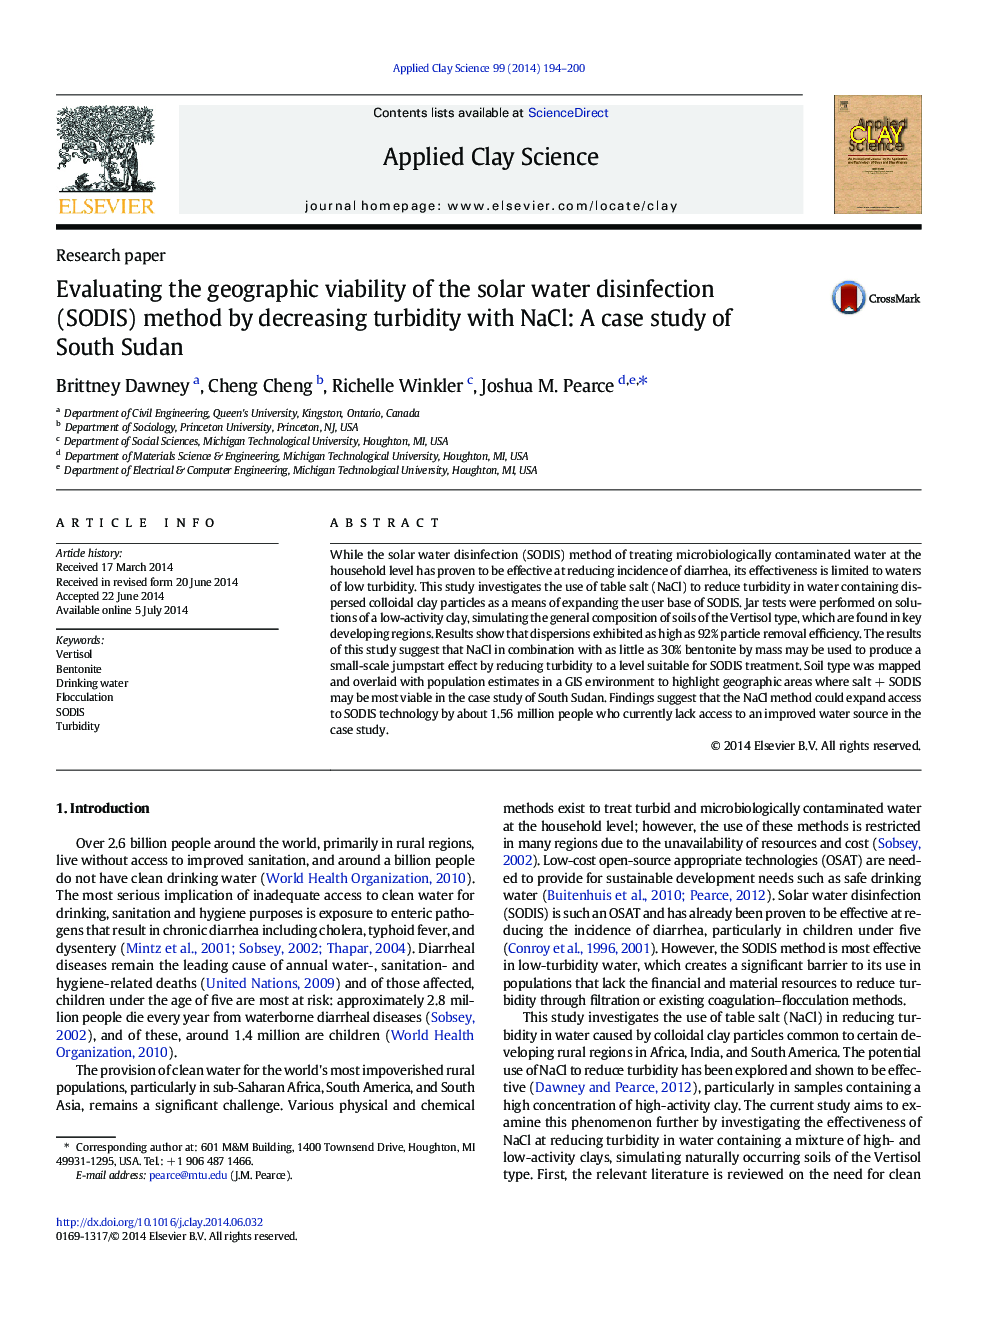 Evaluating the geographic viability of the solar water disinfection (SODIS) method by decreasing turbidity with NaCl: A case study of South Sudan